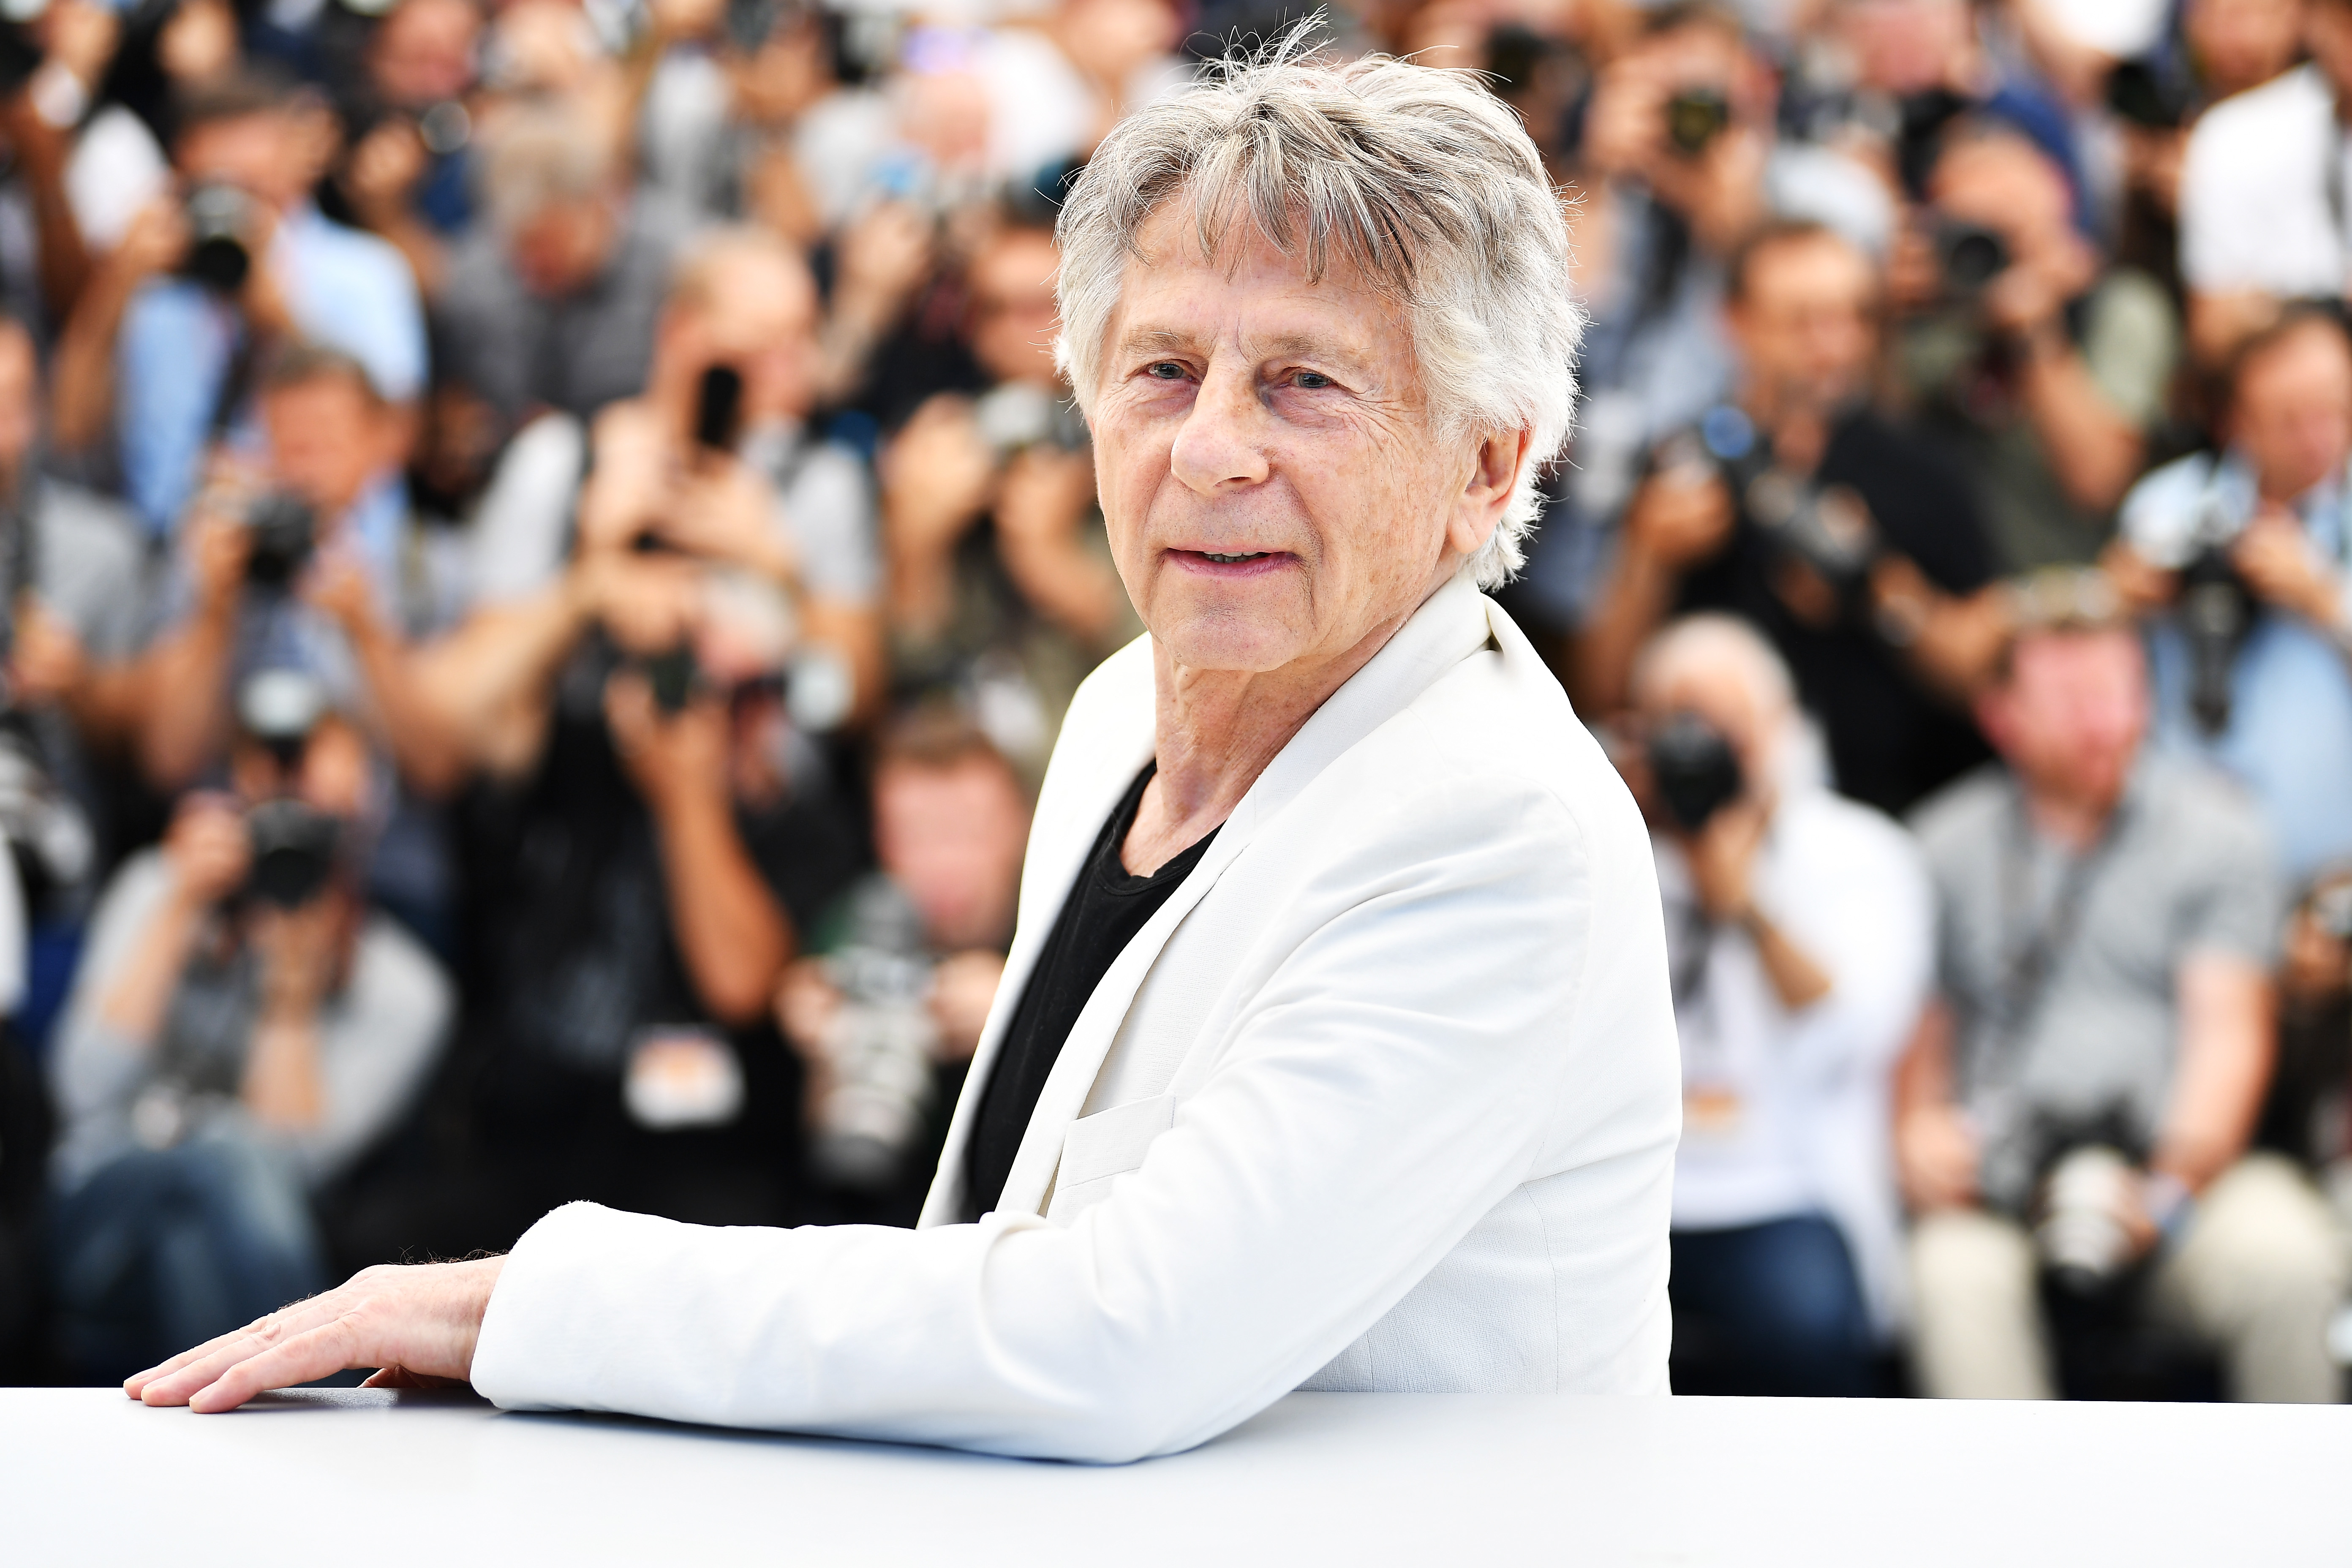 Roman Polanski attends the "Based On A True Story" photocall during the 70th annual Cannes Film Festival at Palais des Festivals on May 27, 2017 in Cannes, France. | Source: Getty Images